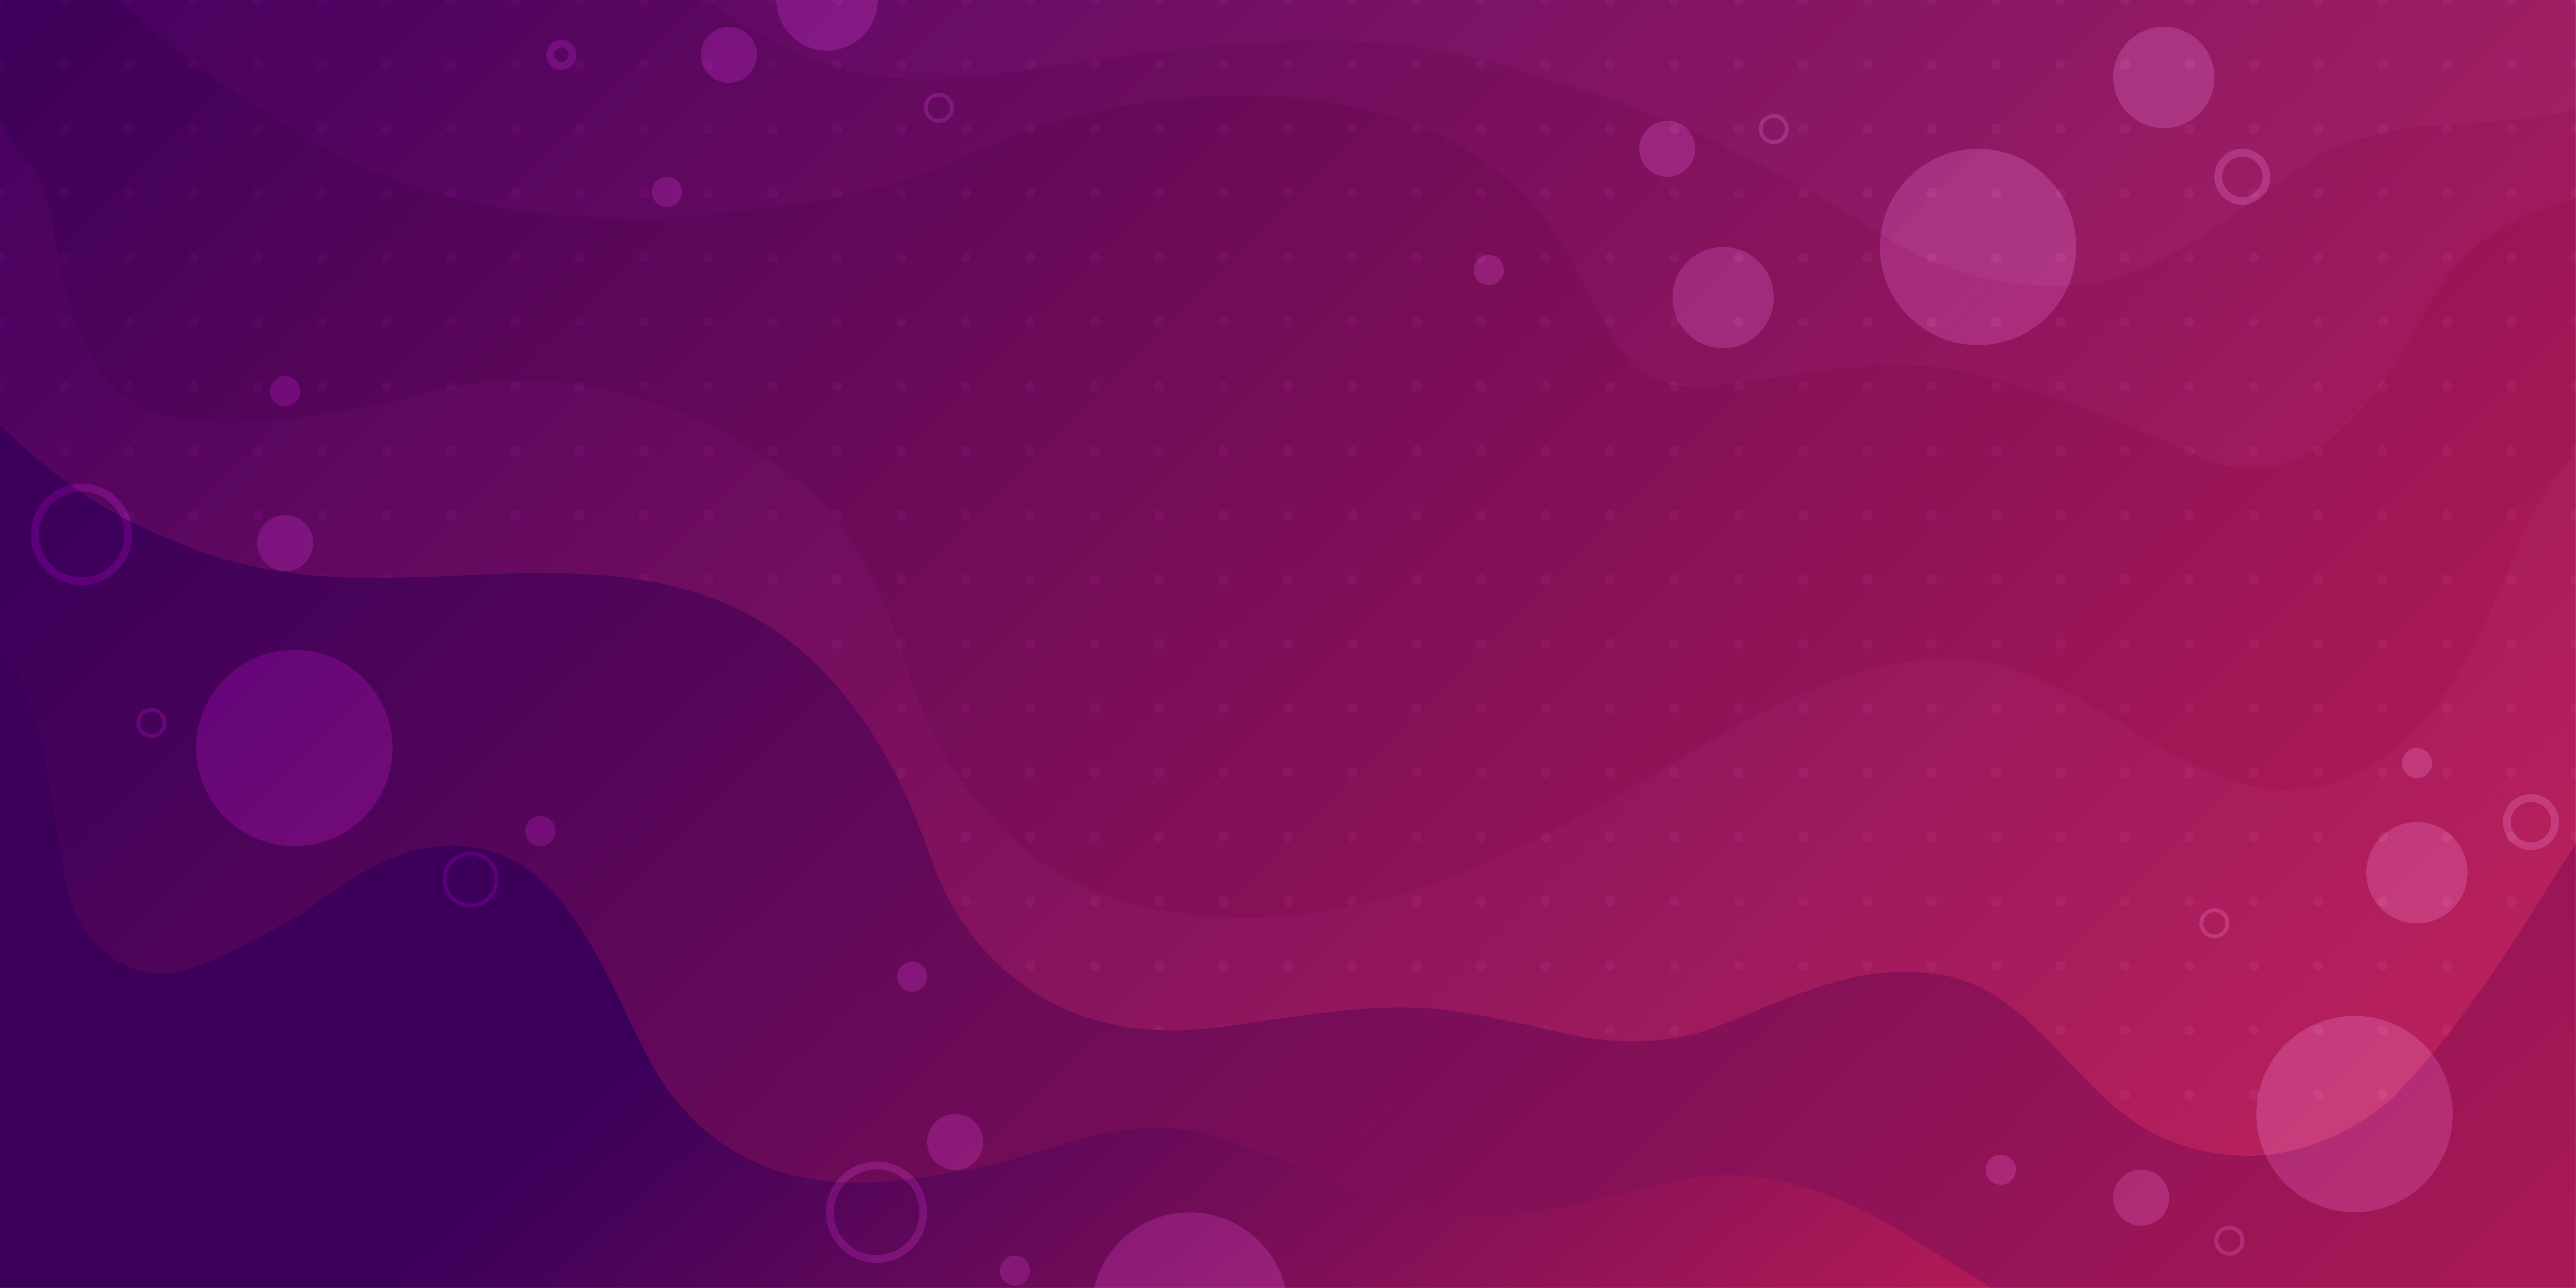 Purple pink abstract fluid shapes background 681239 - Download Free